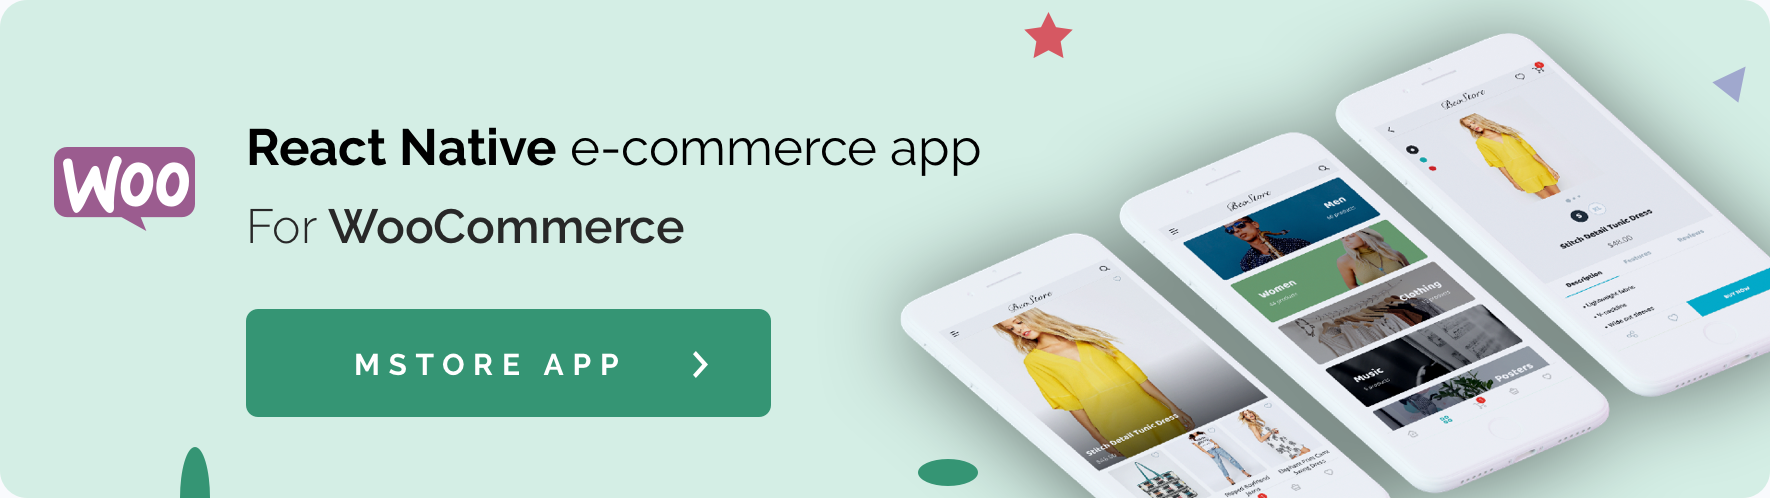 Mstore Shopify - Complete React Native template for e-commerce - 14